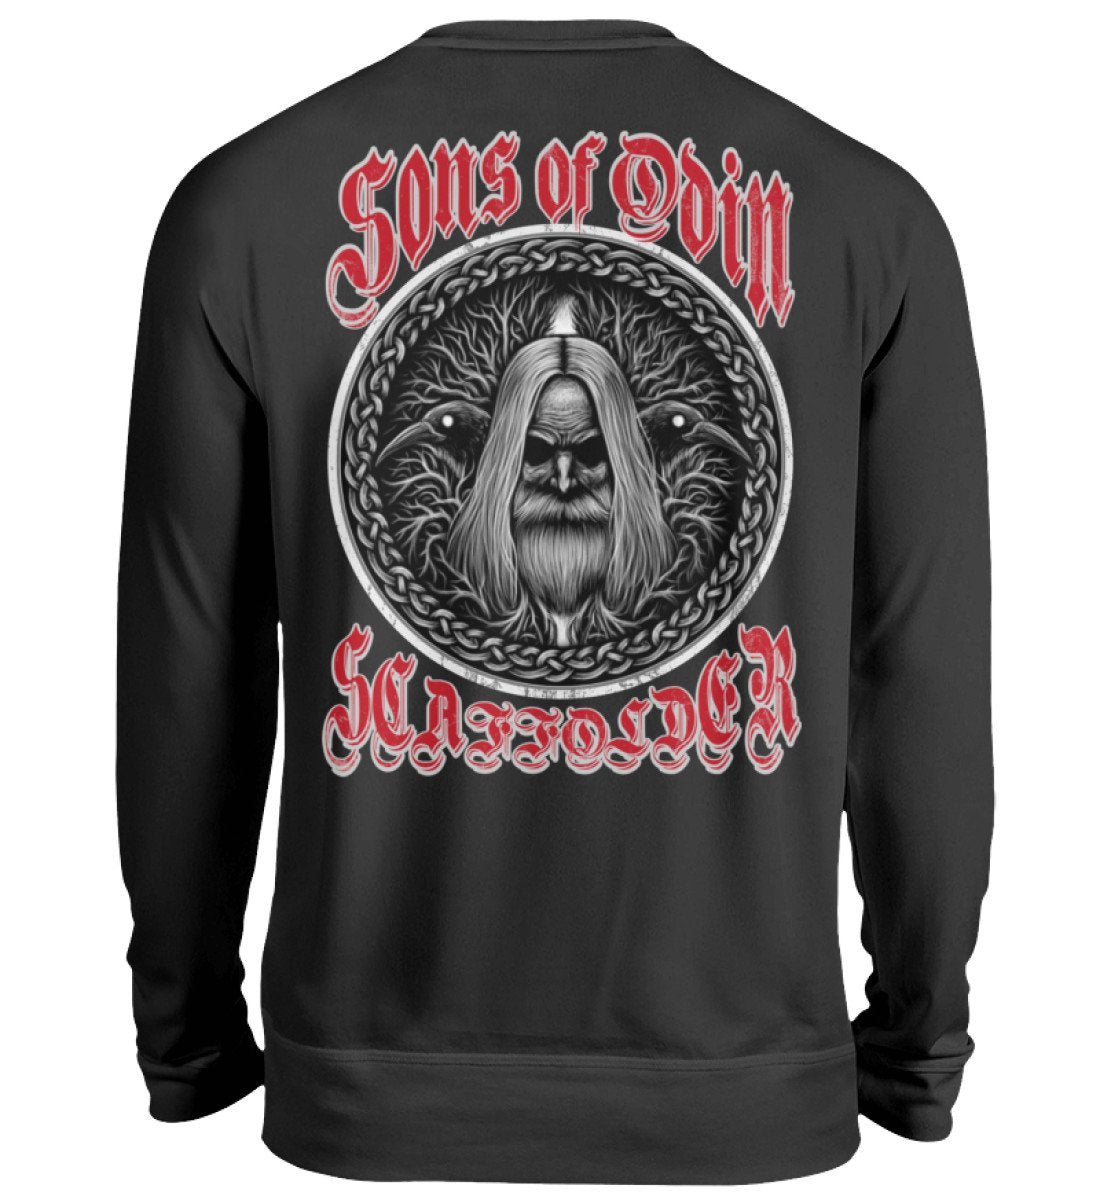 Sons of Odin - Gerüstbauer Pullover